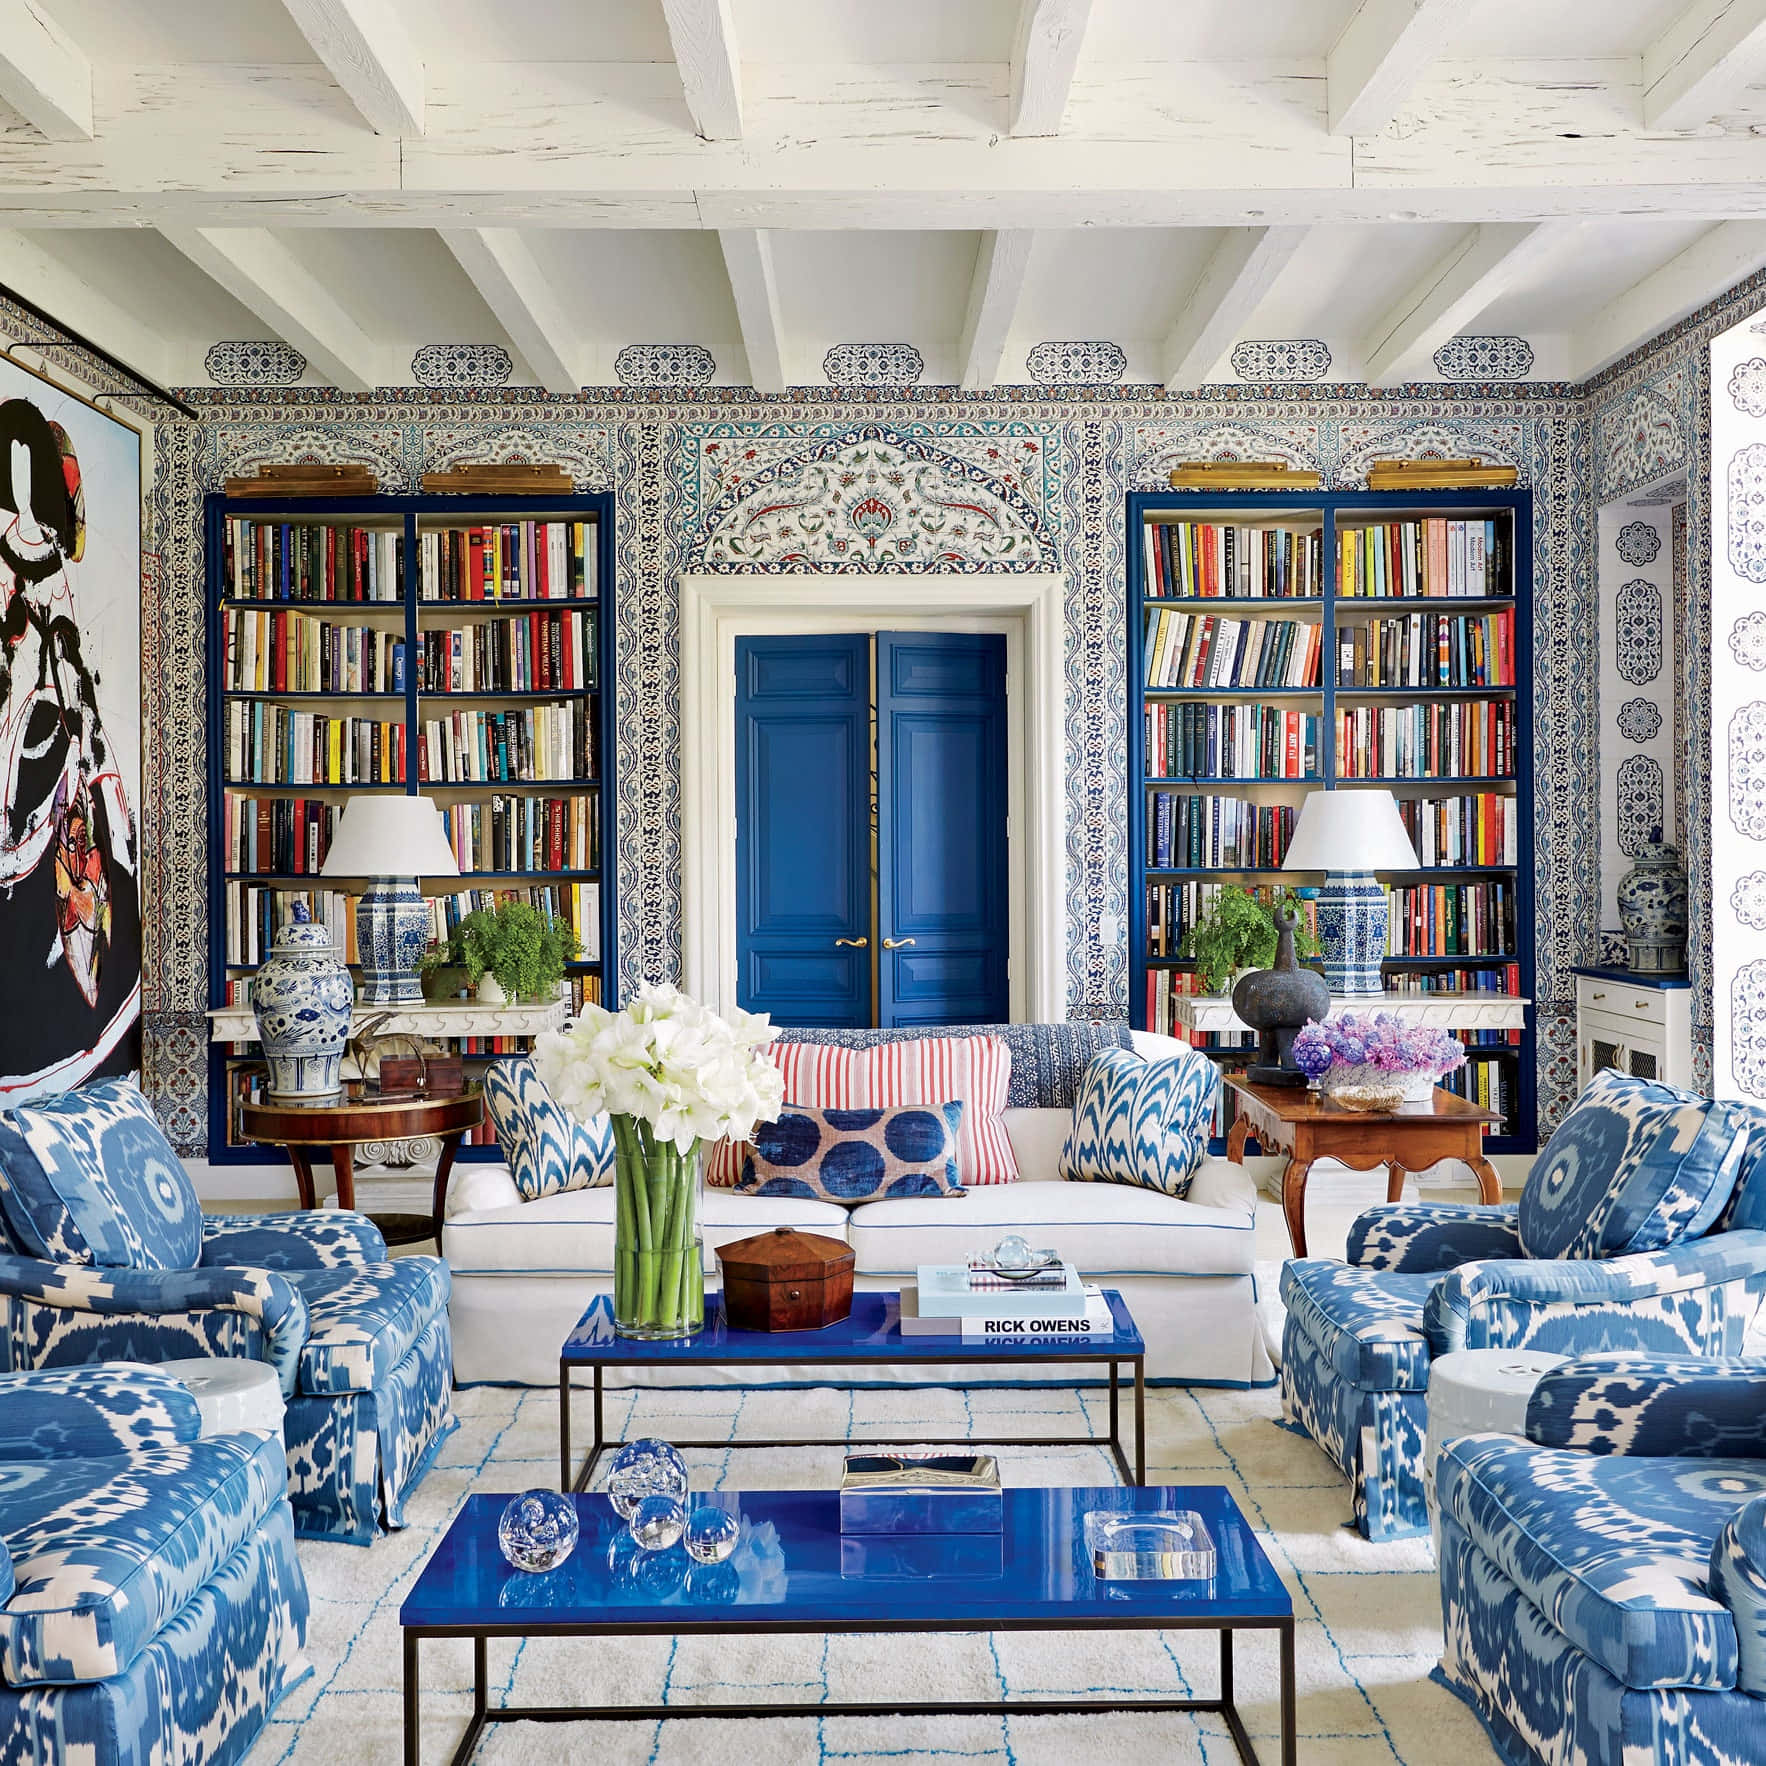 A Blue And White Living Room With Bookshelves